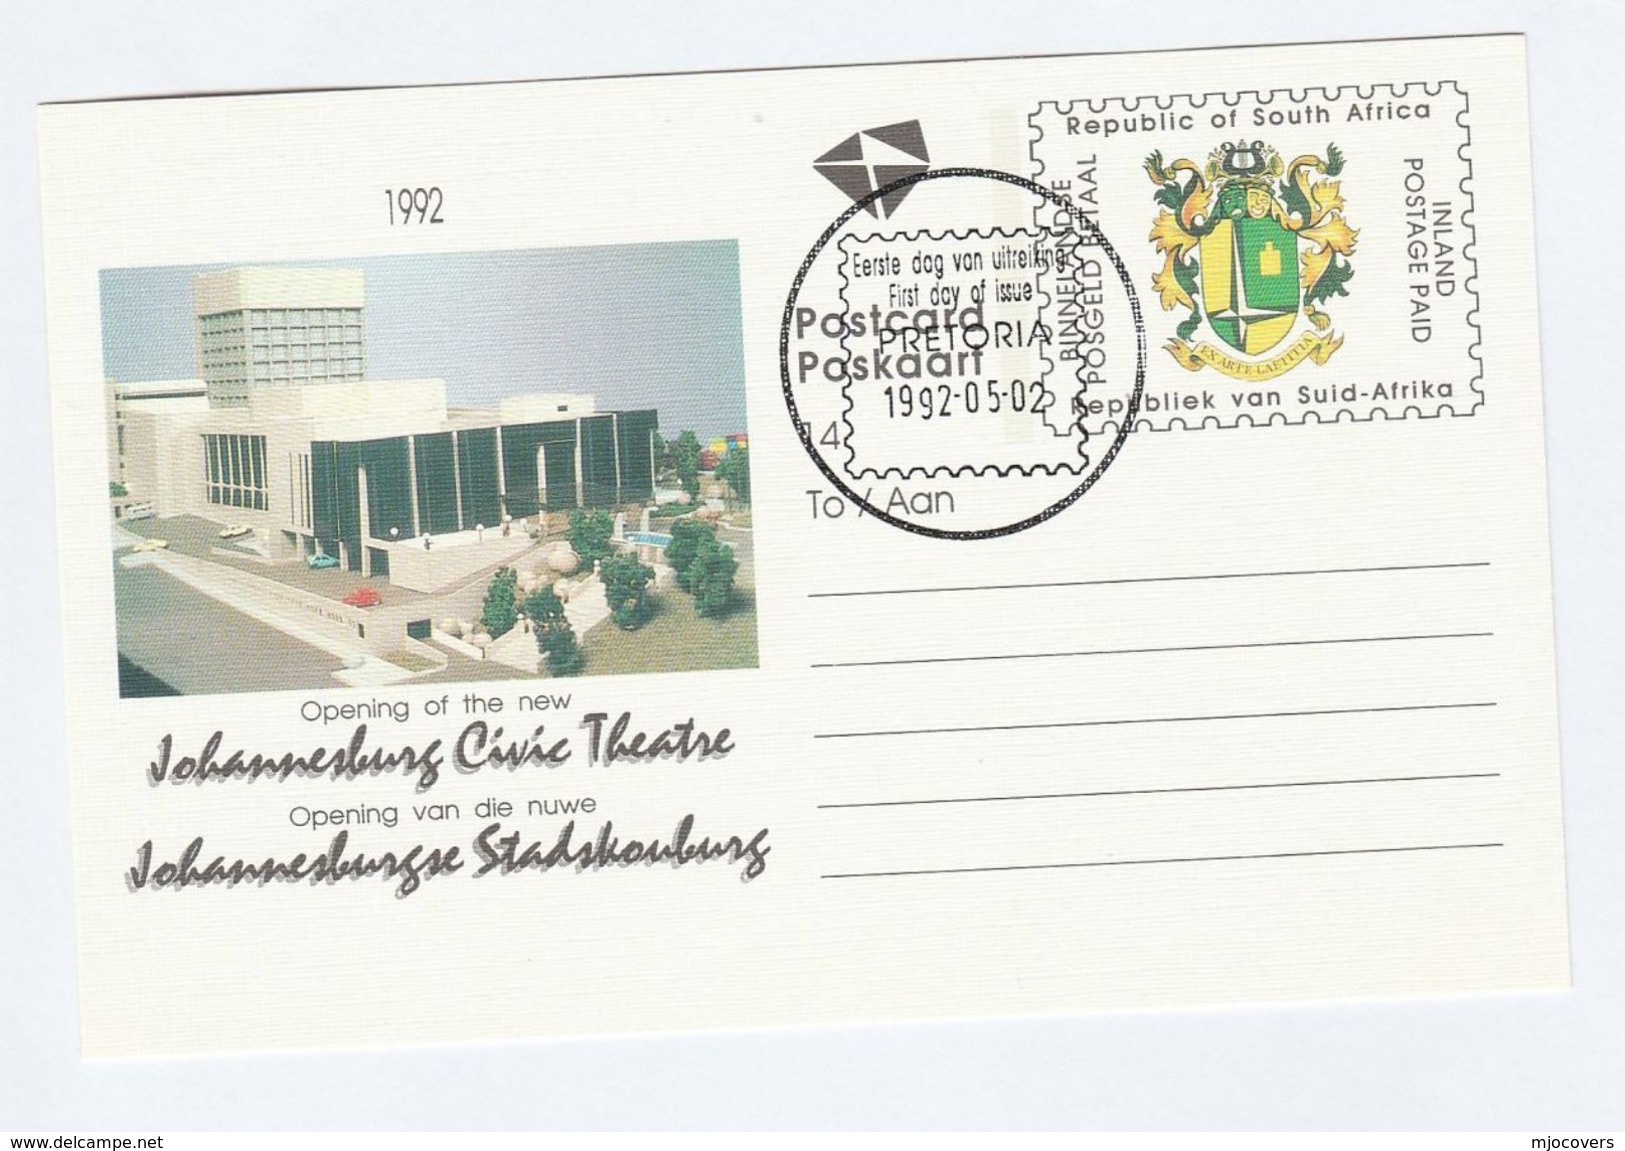 1992 SOUTH AFRICA STATIONERY Illus CIVIC THEATRE At JOHANNESBURG , FIRST DAY Rsa Stamps Postal Card Cover - Brieven En Documenten